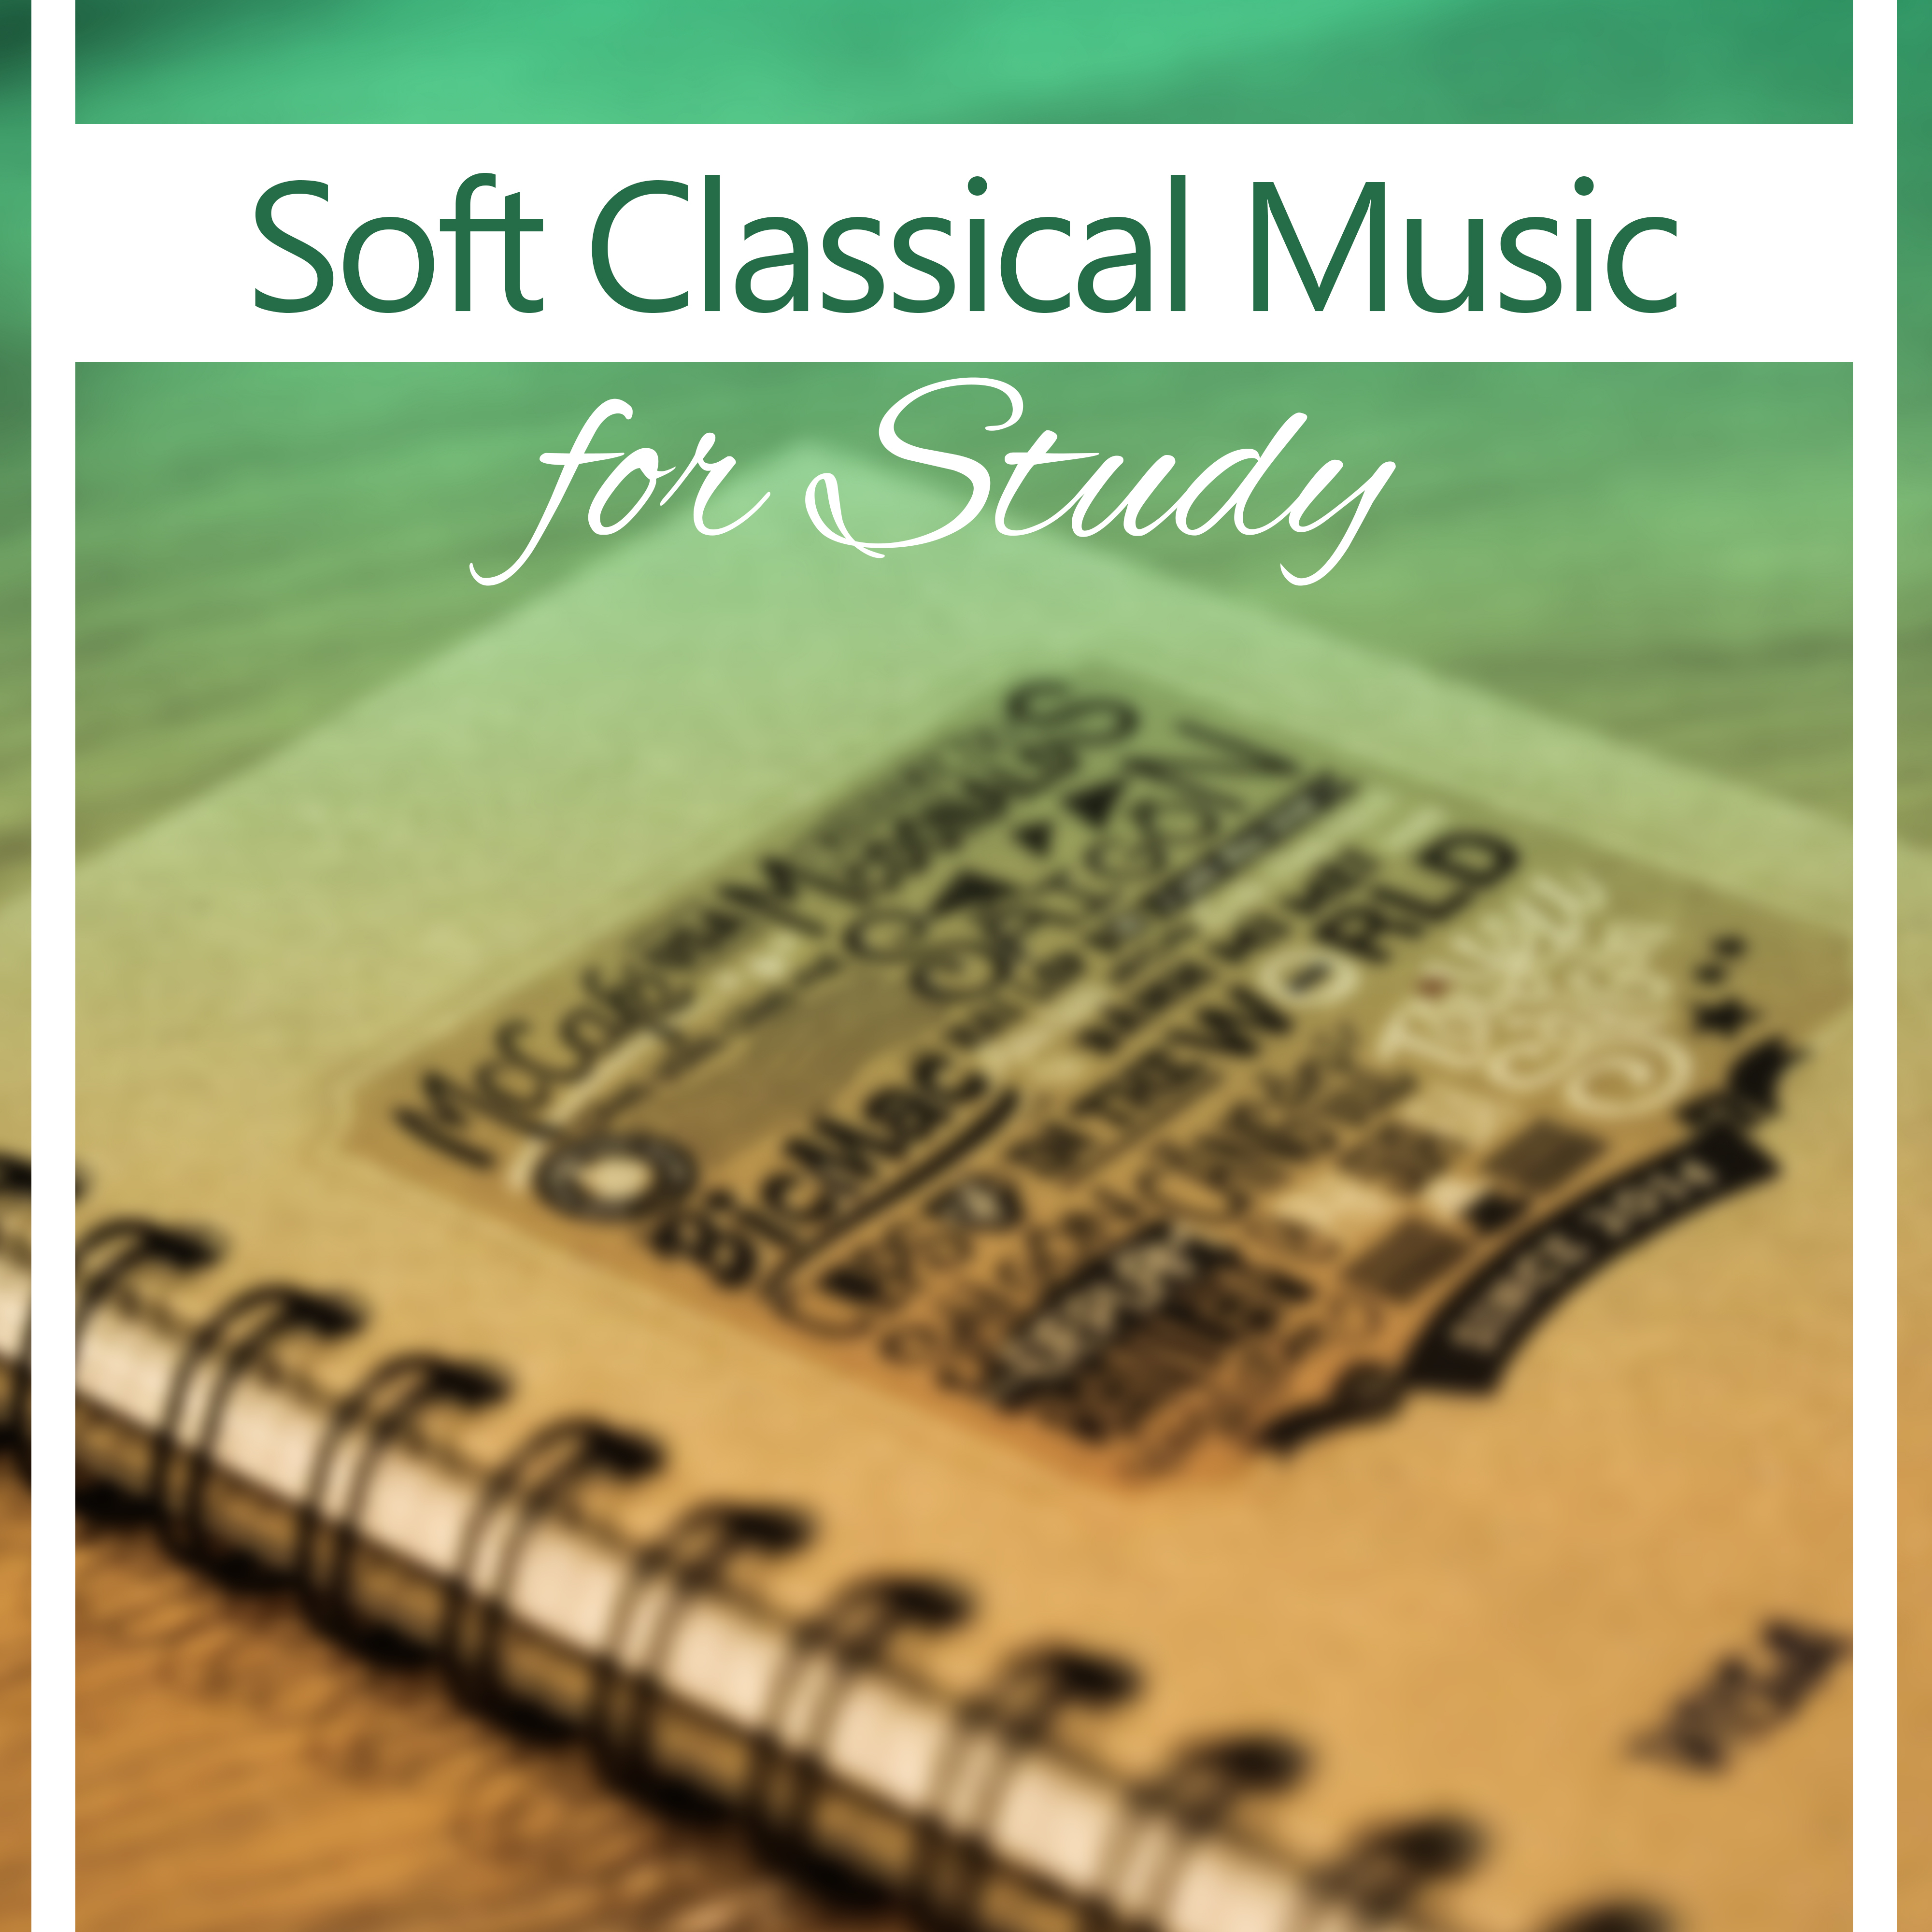 Soft Classical Music for Study – Easy Work, Train Your Mind, Brain Power, Stress Free, Music Helps Pass Exam